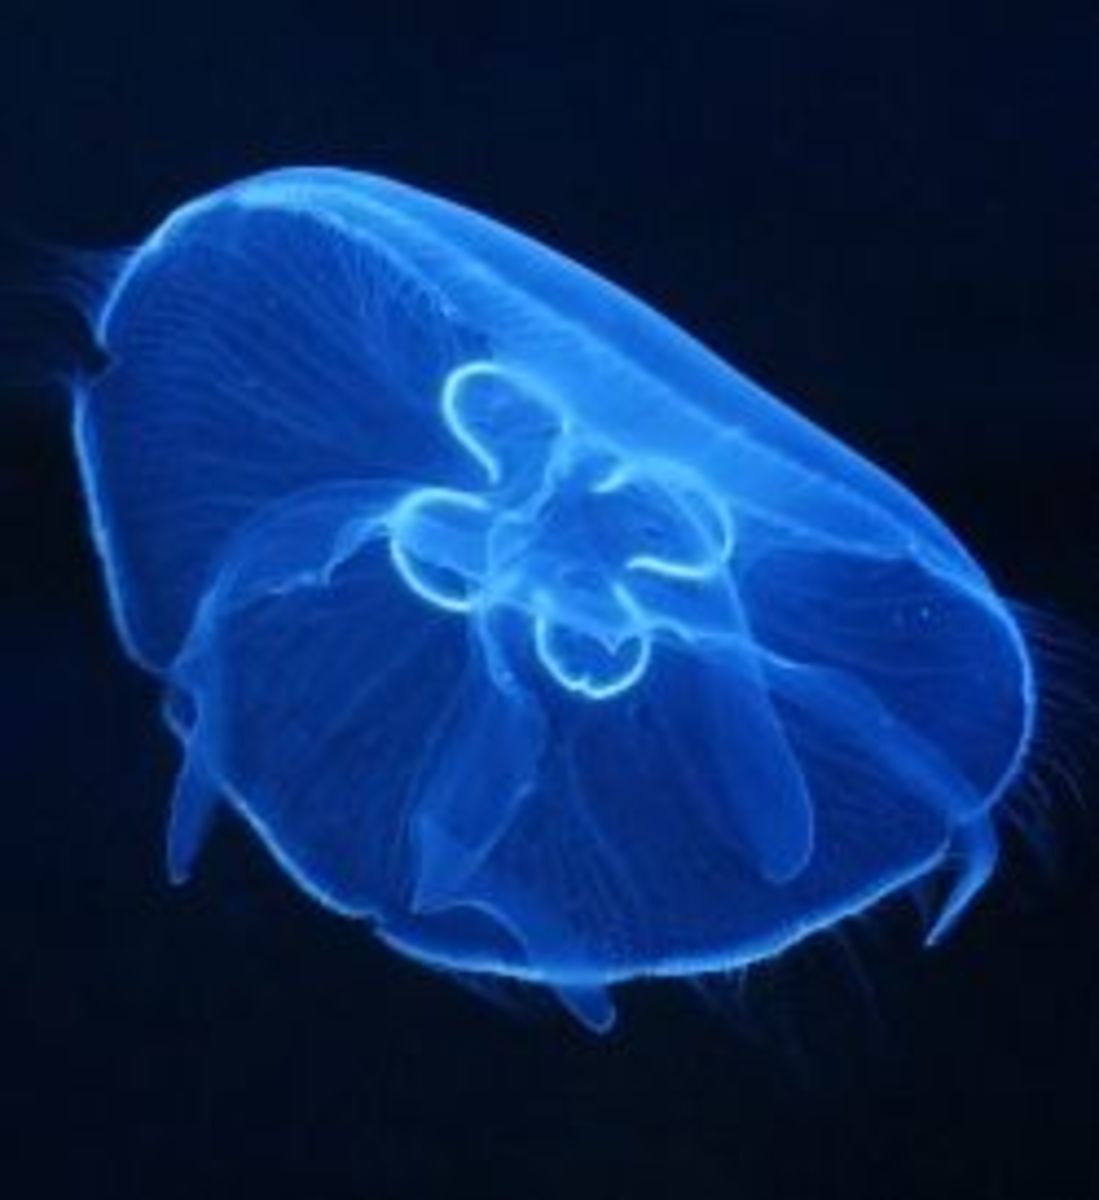 The Cnidarians: Jellyfish, Sea Anemones, Hydrozoans, and Corals